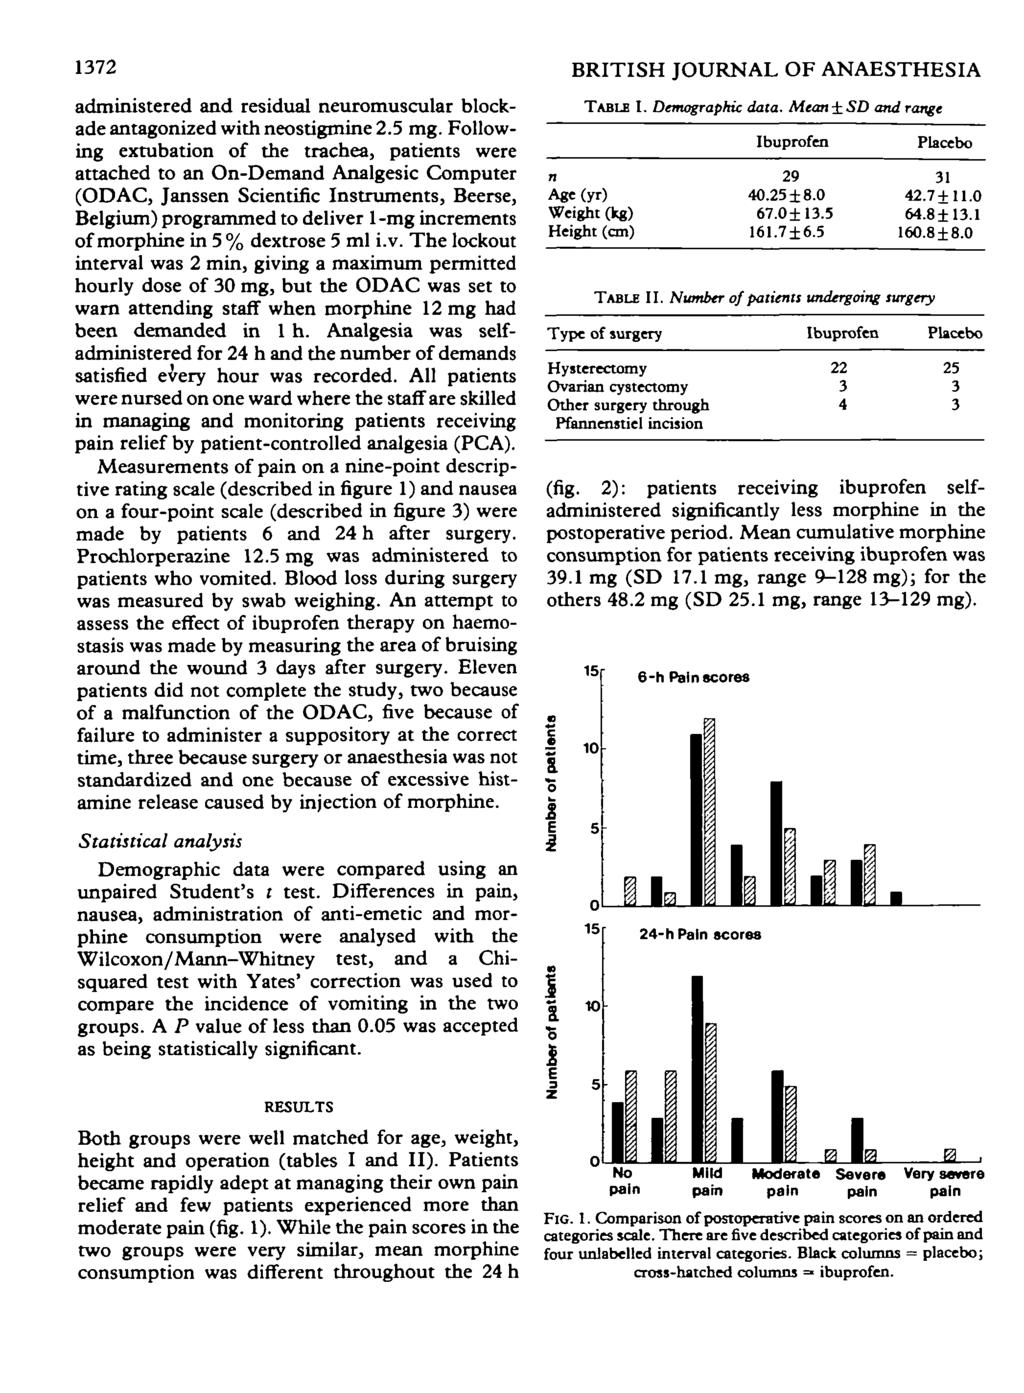 172 administered and residual neuromuscular blockade antagonized with neostigmine 2.5 mg.